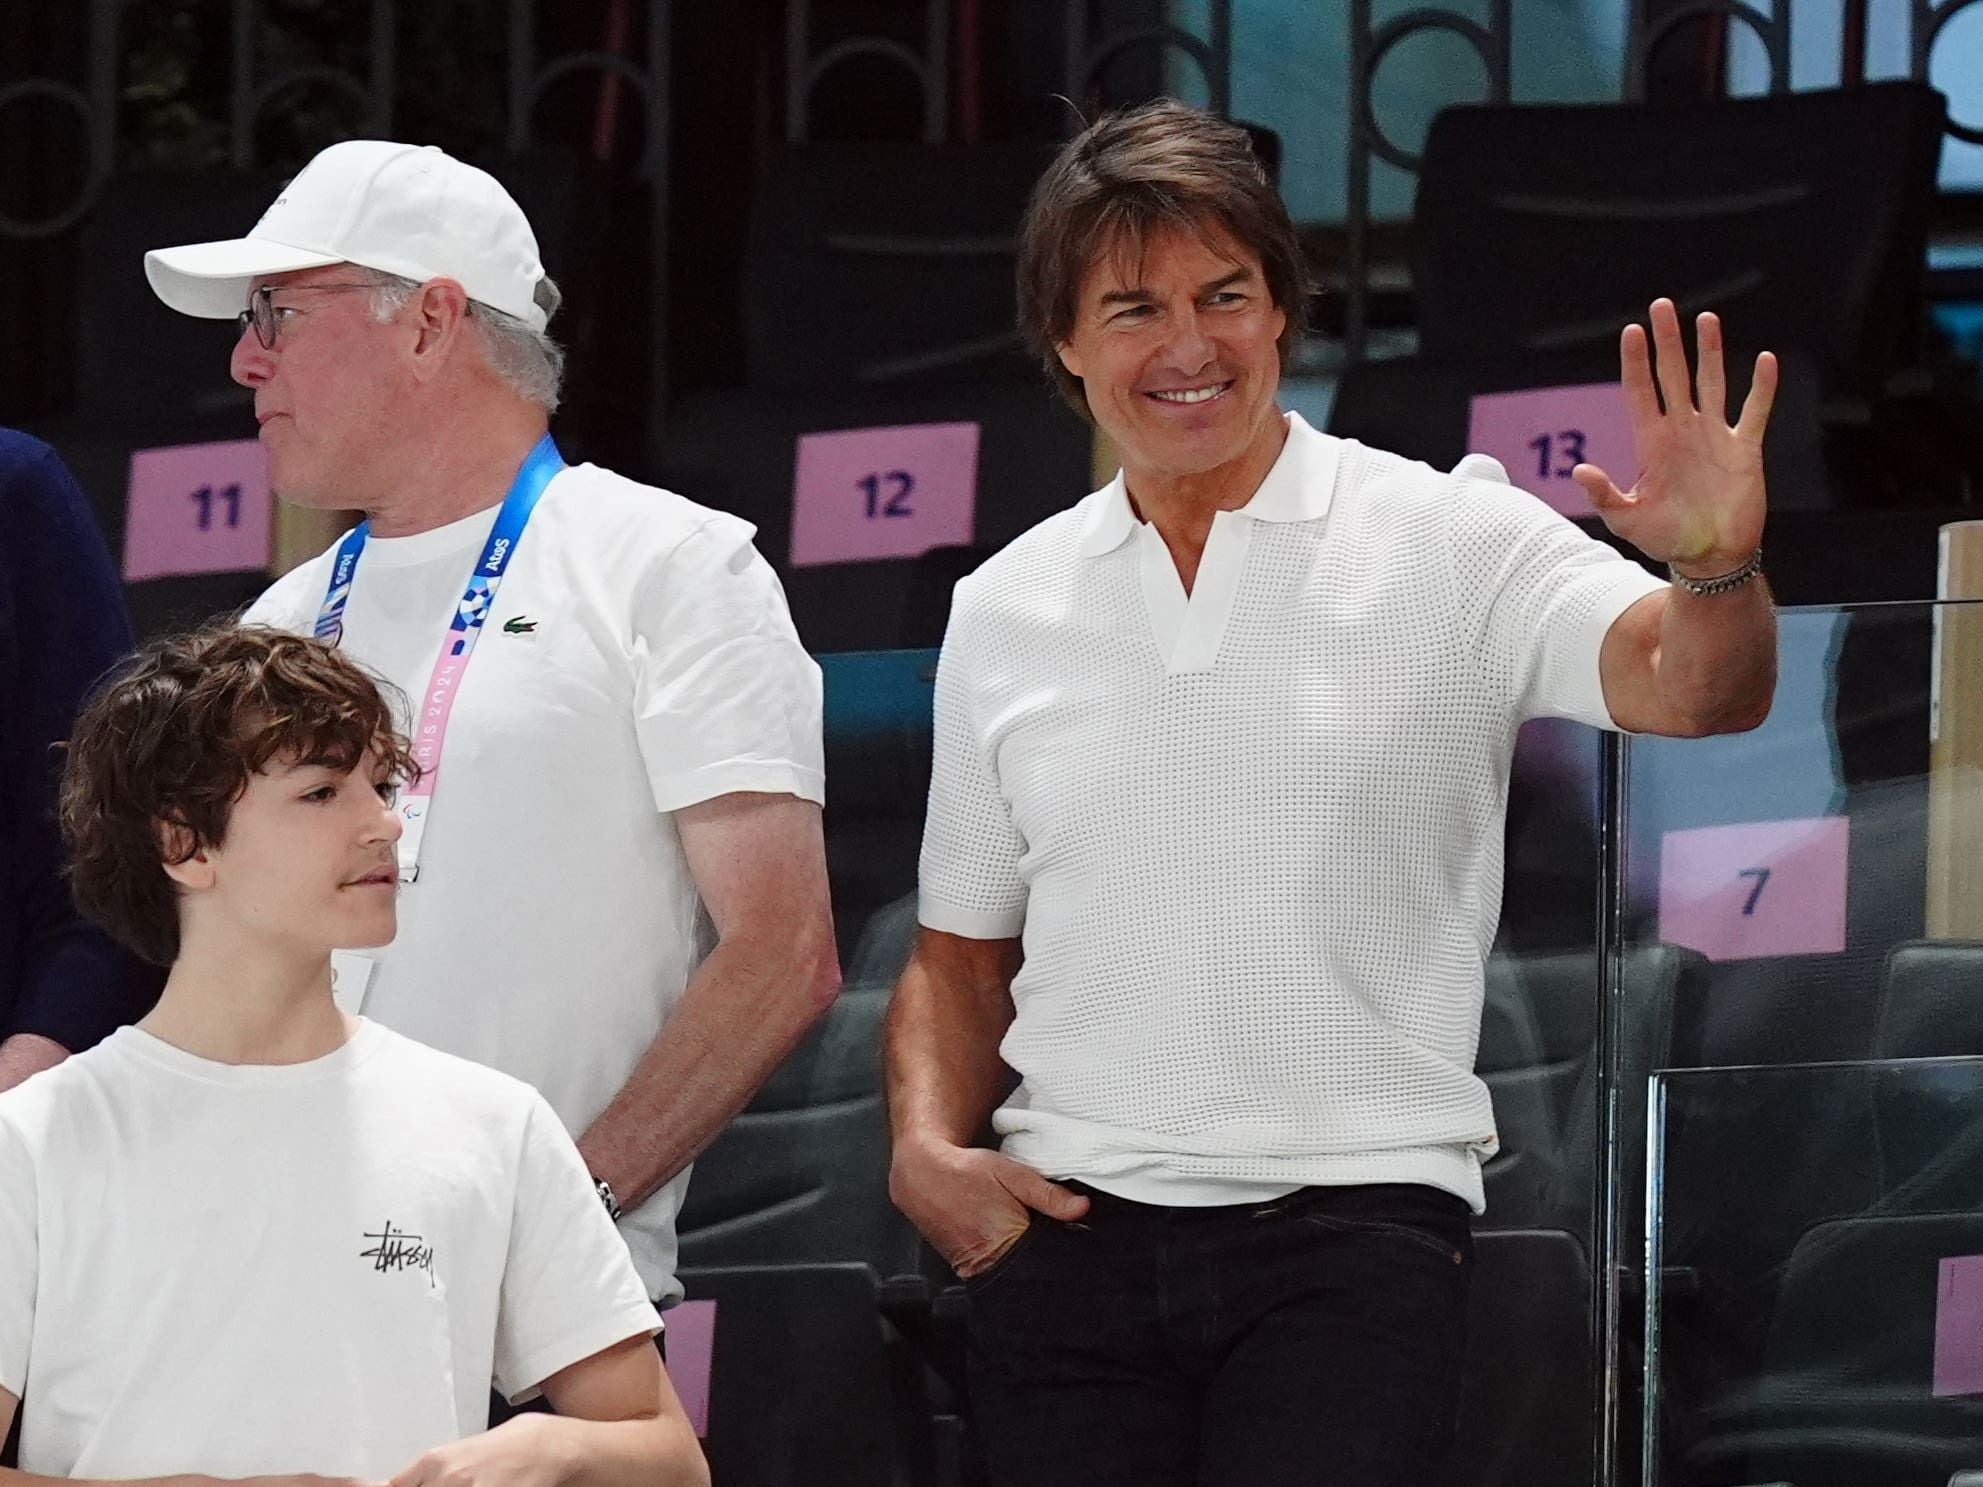 Tom Cruise and Ariana Grande watch Simone Biles compete at Paris Olympics